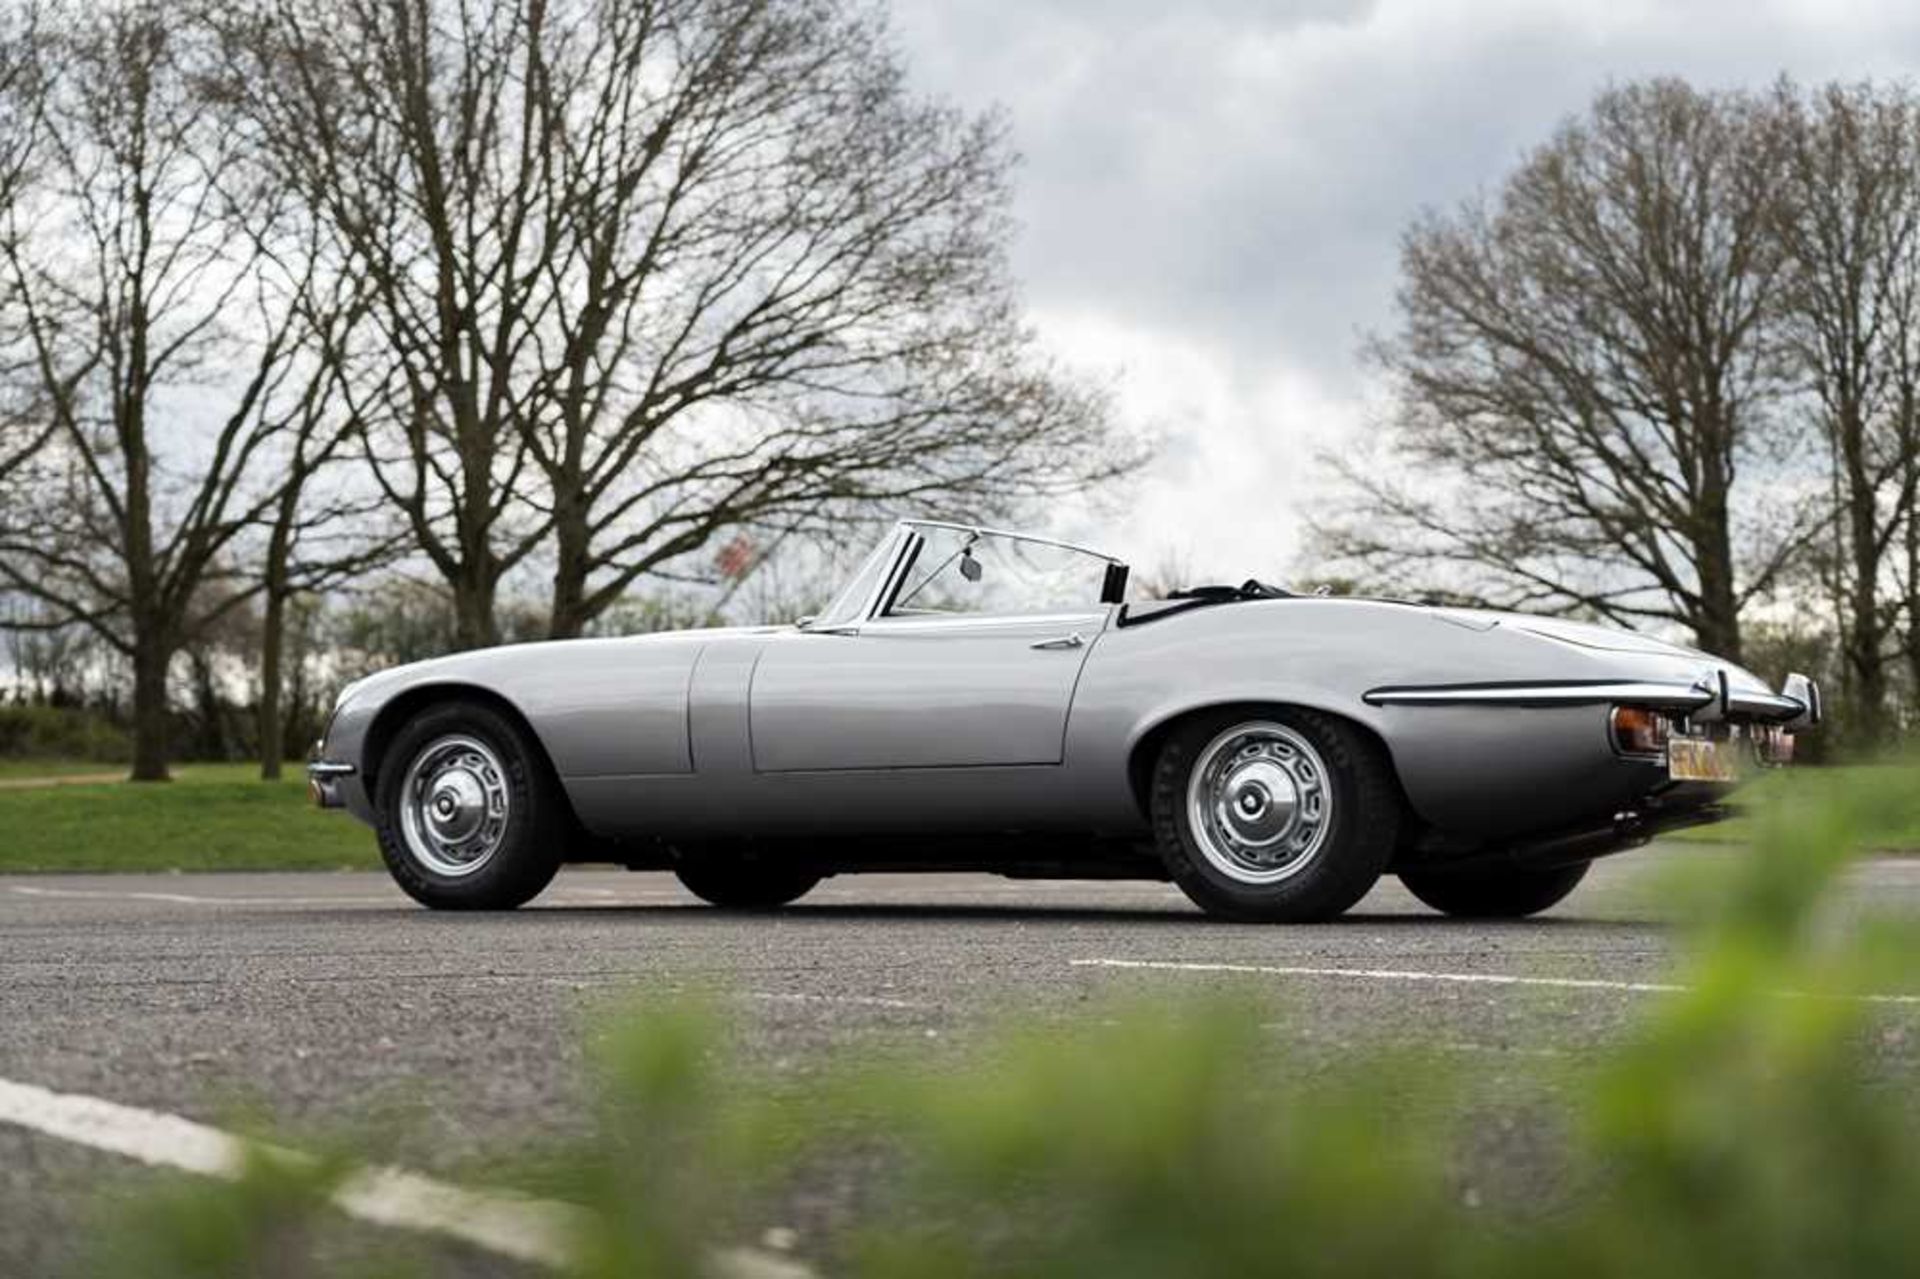 1974 Jaguar E-Type Series III V12 Roadster Only one family owner and 54,412 miles from new - Image 52 of 89